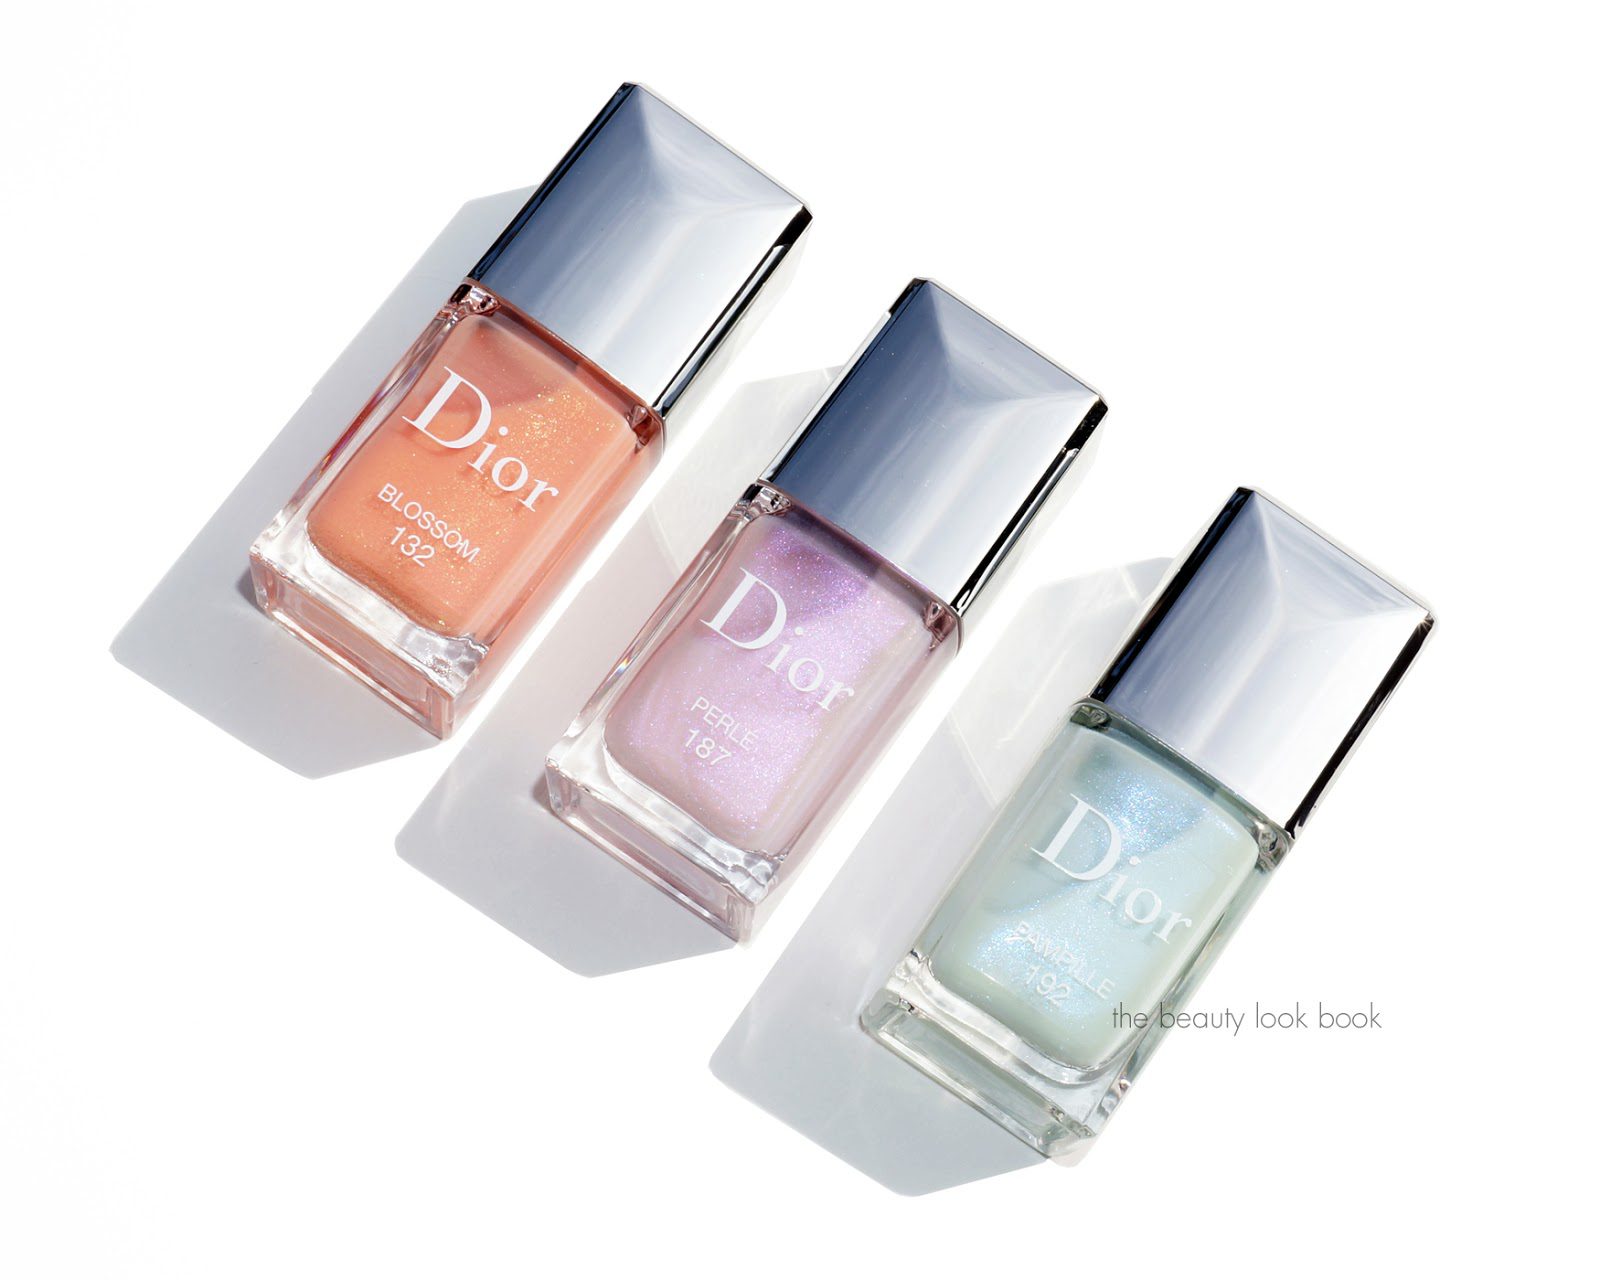 Dior Perle Trianon Review & Cloudy Ombre Nails